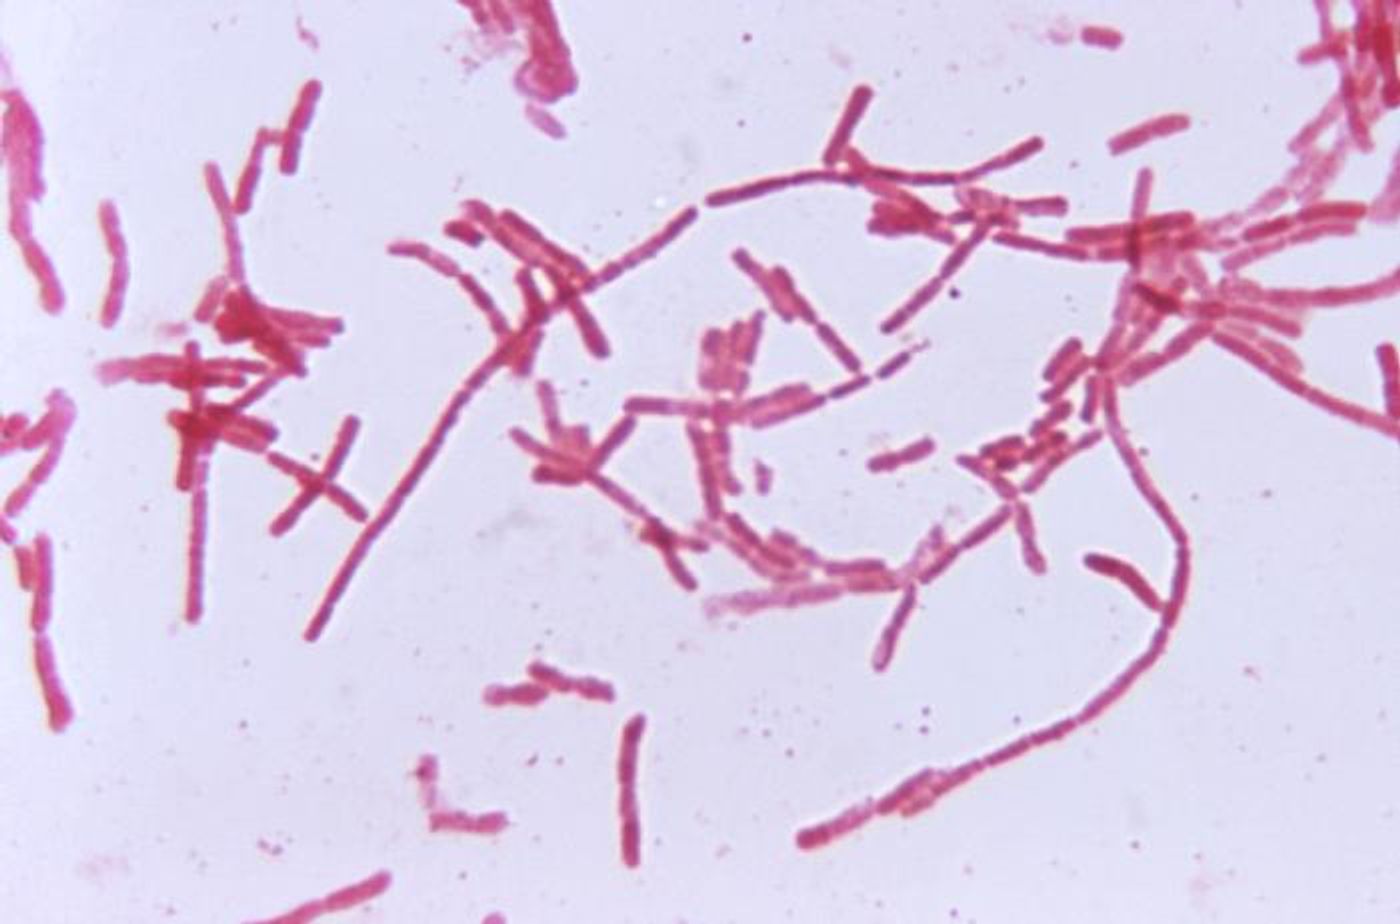 Bacteroides hypermegas, a member of the genus Bacteroides, which are mainly found in the intestine as normal flora. Credit: CDC/ Dr. V. R. Dowell, Jr.